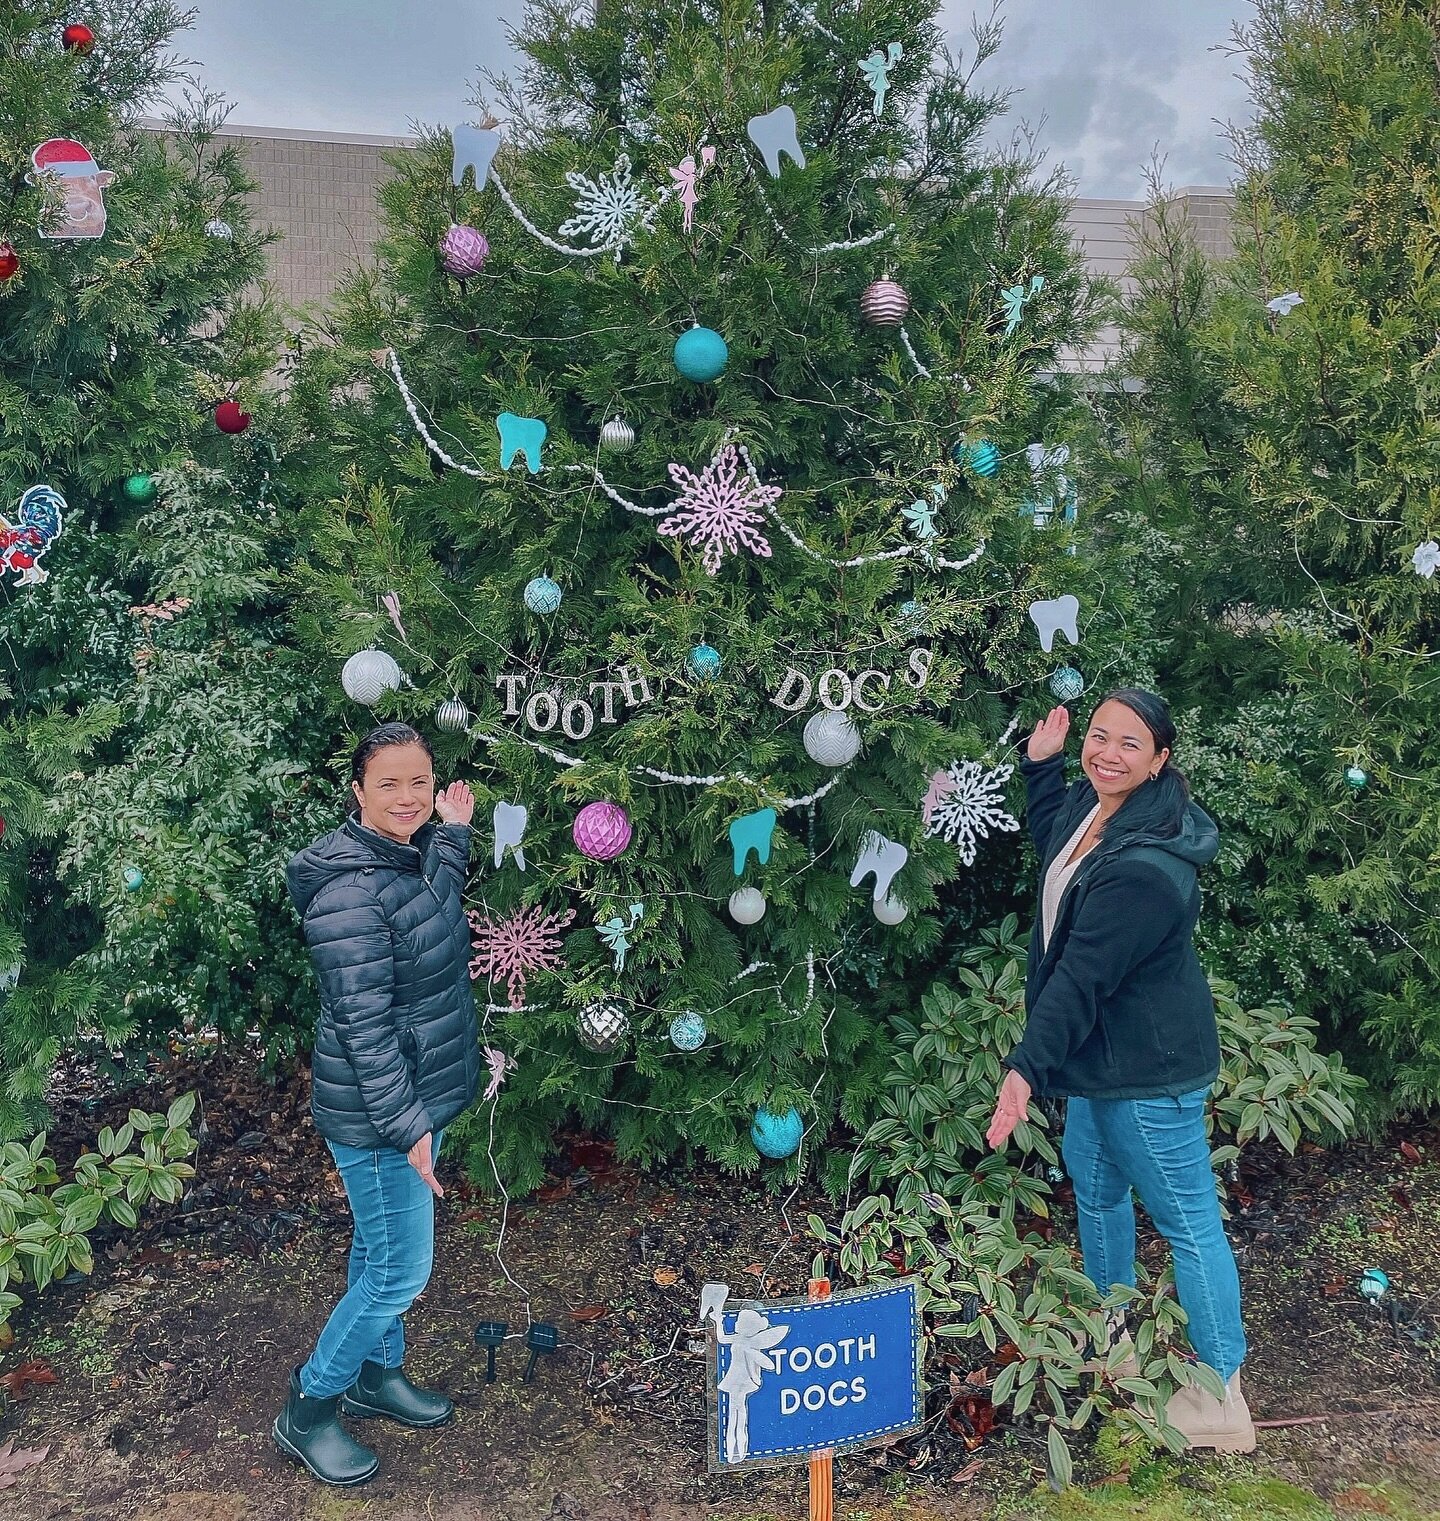 Make sure to be on the look for our tooth fairy tree near Hockinson Middle School! Thank you to Dr. Lenz, Tyler Lenz &amp; Kim for taking time out of their busy schedule to help light up Hockinson &amp; get everyone in the Christmas spirit! 🦷🧚🎄